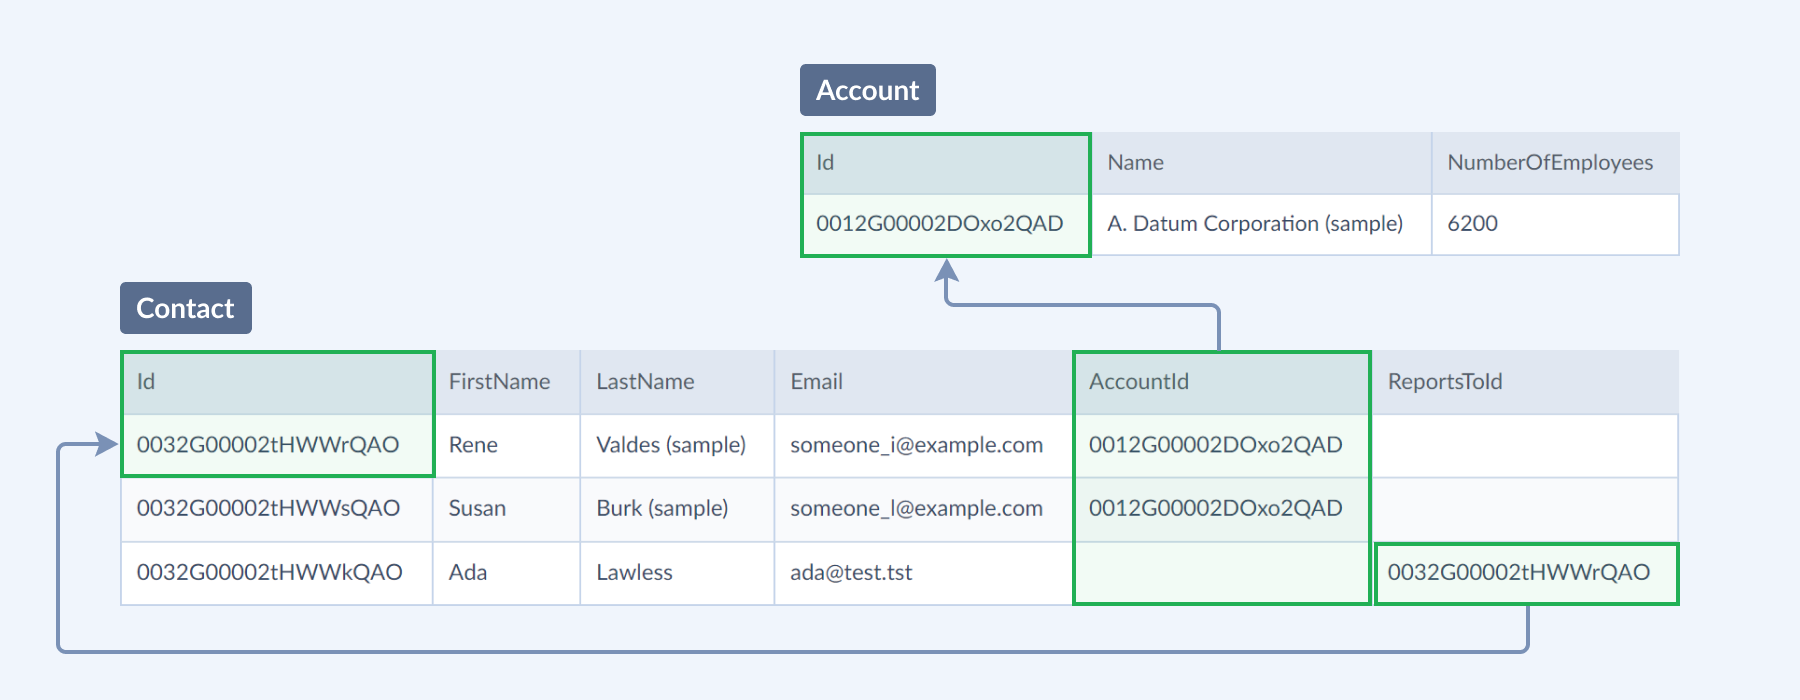 Salesforce scheme - contacts and accounts